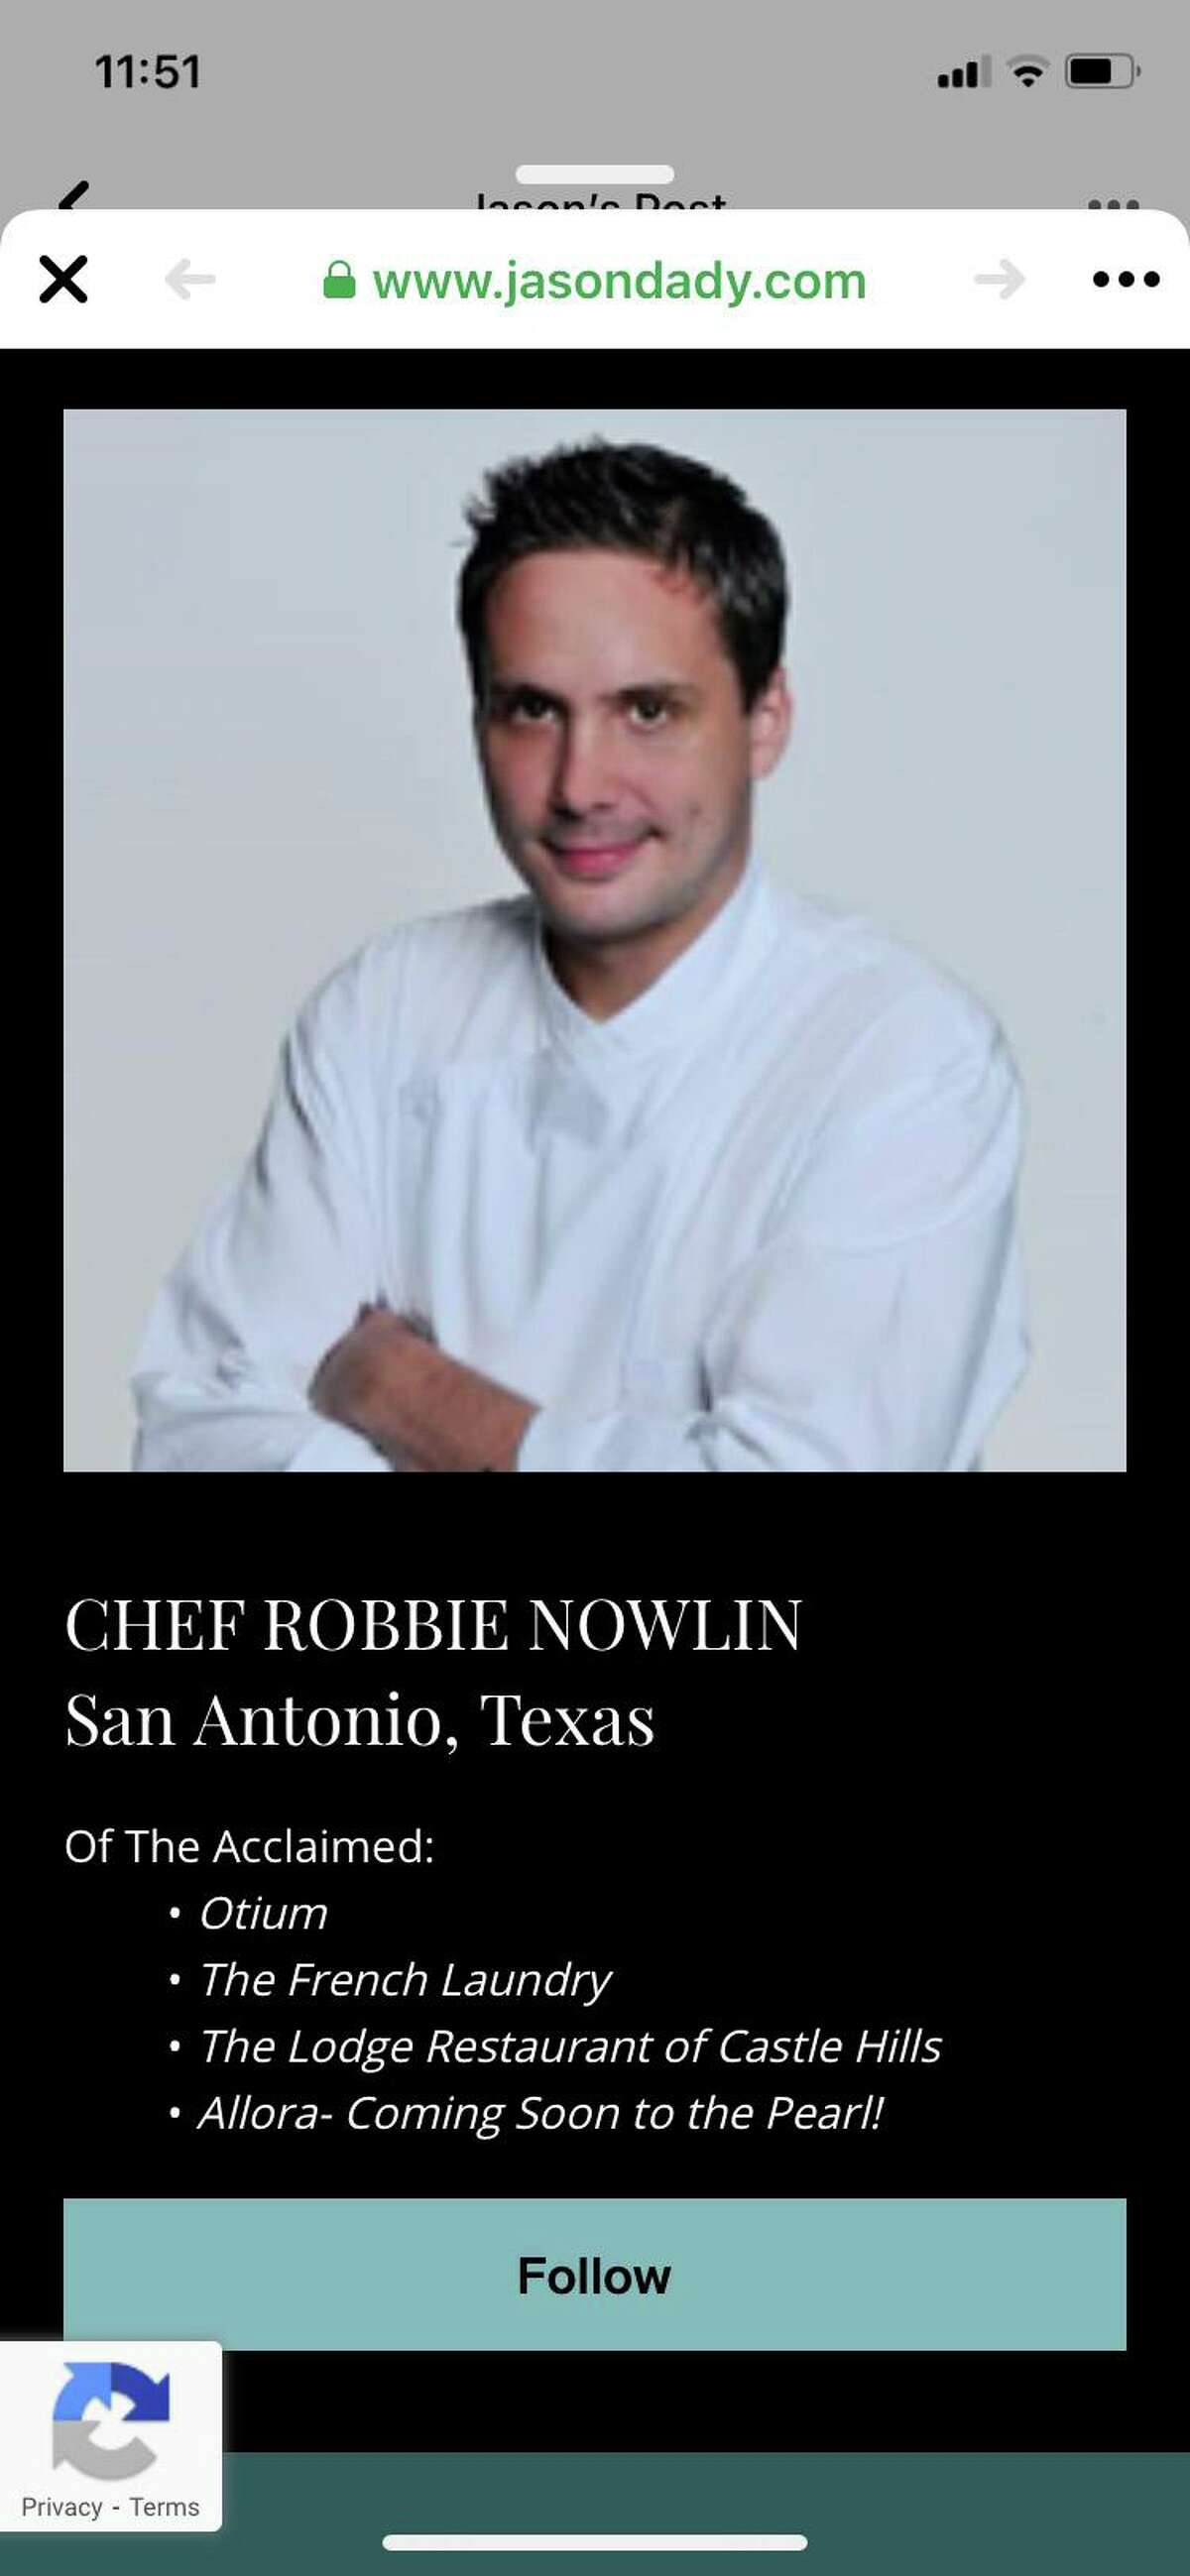 San Antonio chef Robbie Nowlin was identified as the chef at the forthcoming Allora in an advertisement briefly posted online.